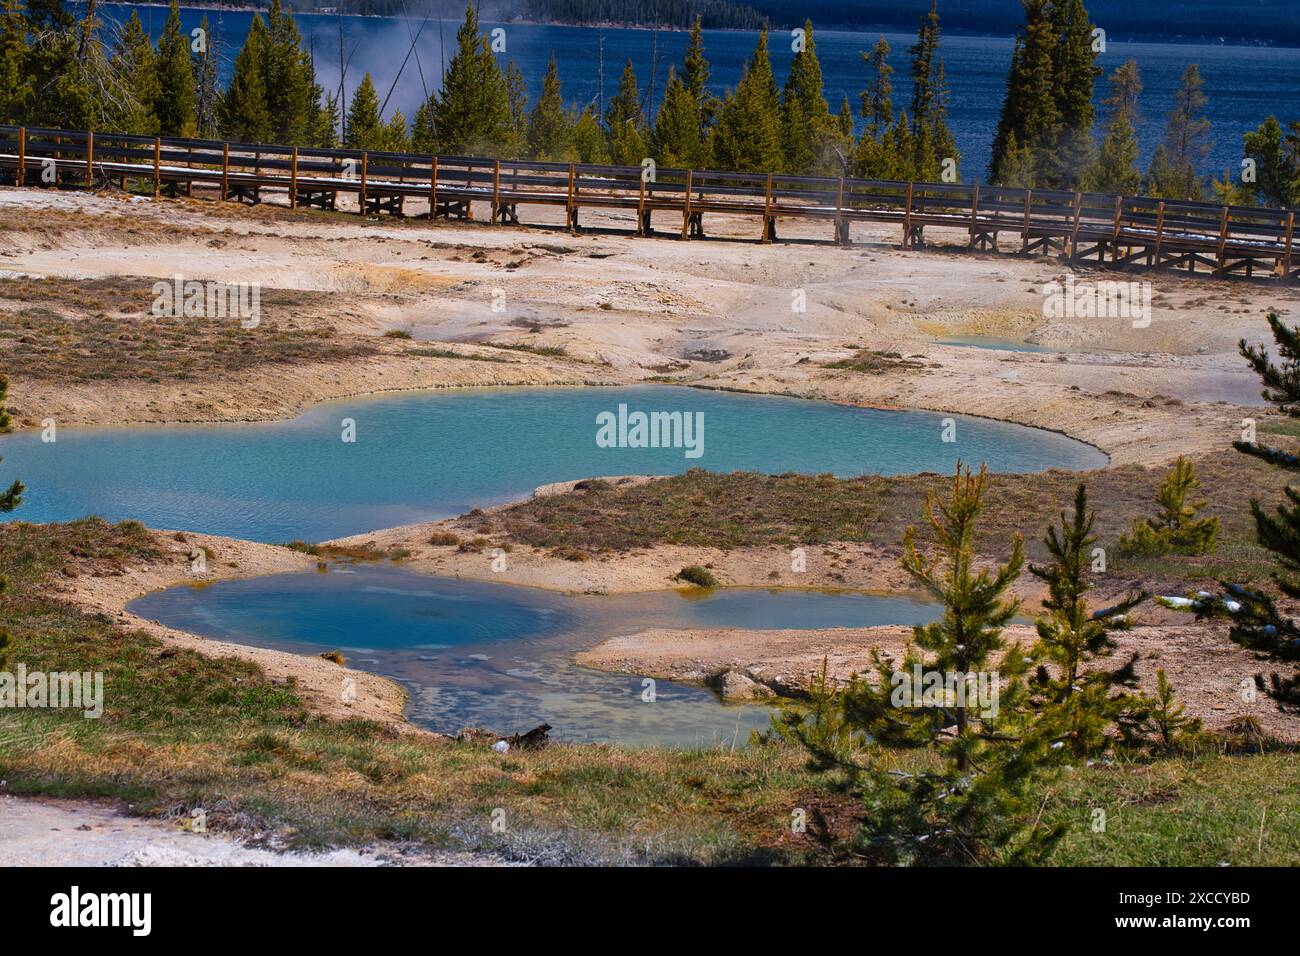 Geyers with color algae covering the rocks in Yellowstone park in Wyoming, USA Stock Photo